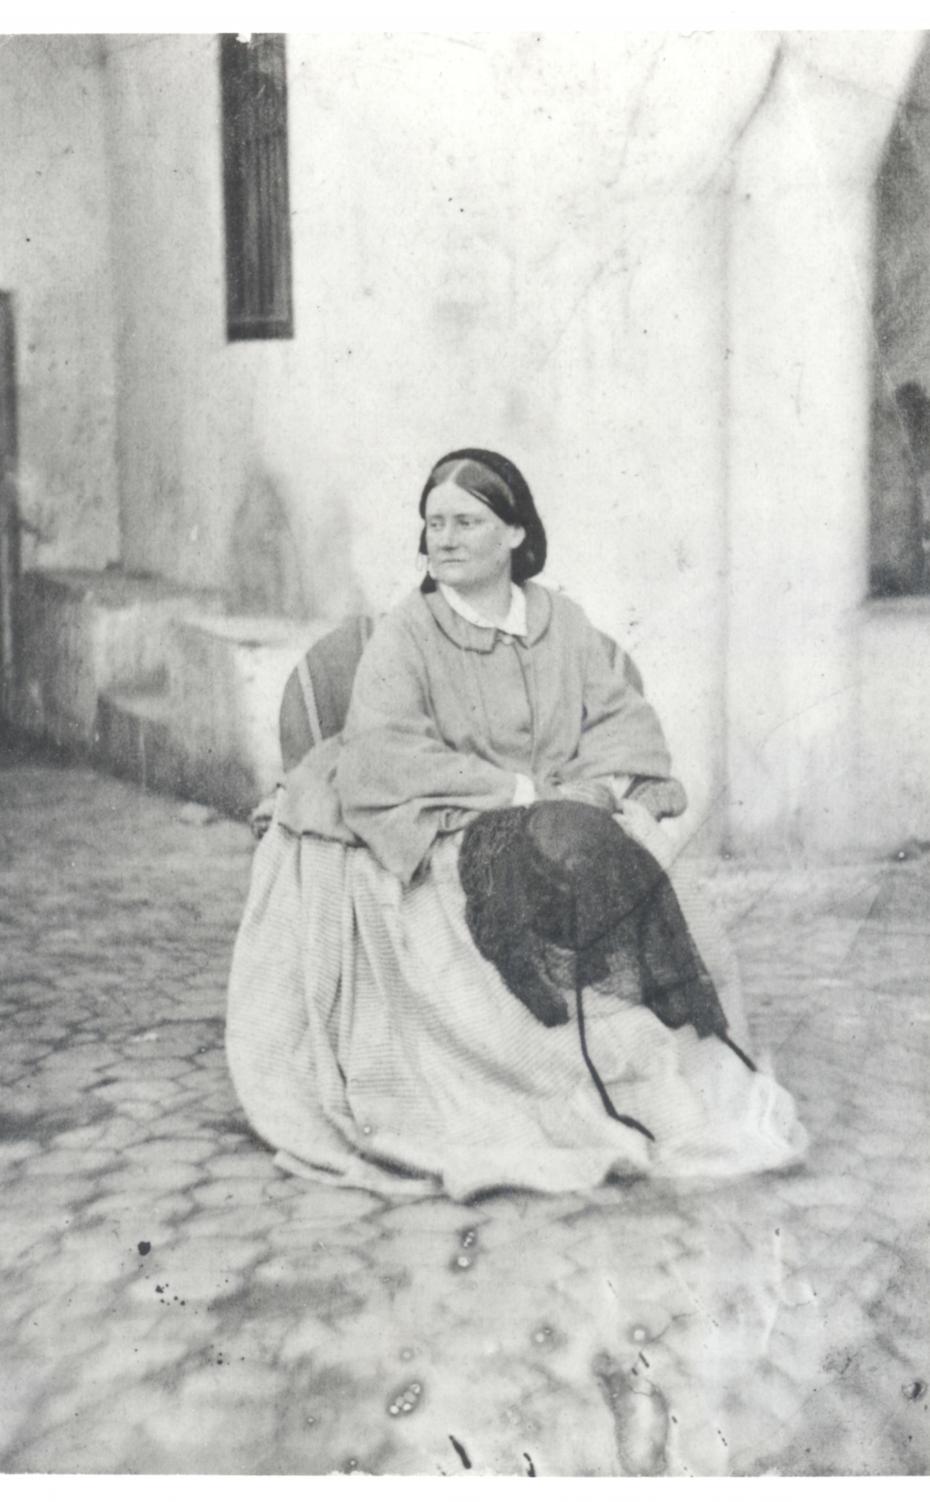 Barbara Bodichon, taken in Algiers, by an unknown photographer, circa 1870 (archive reference: GCPH 4/2/7)